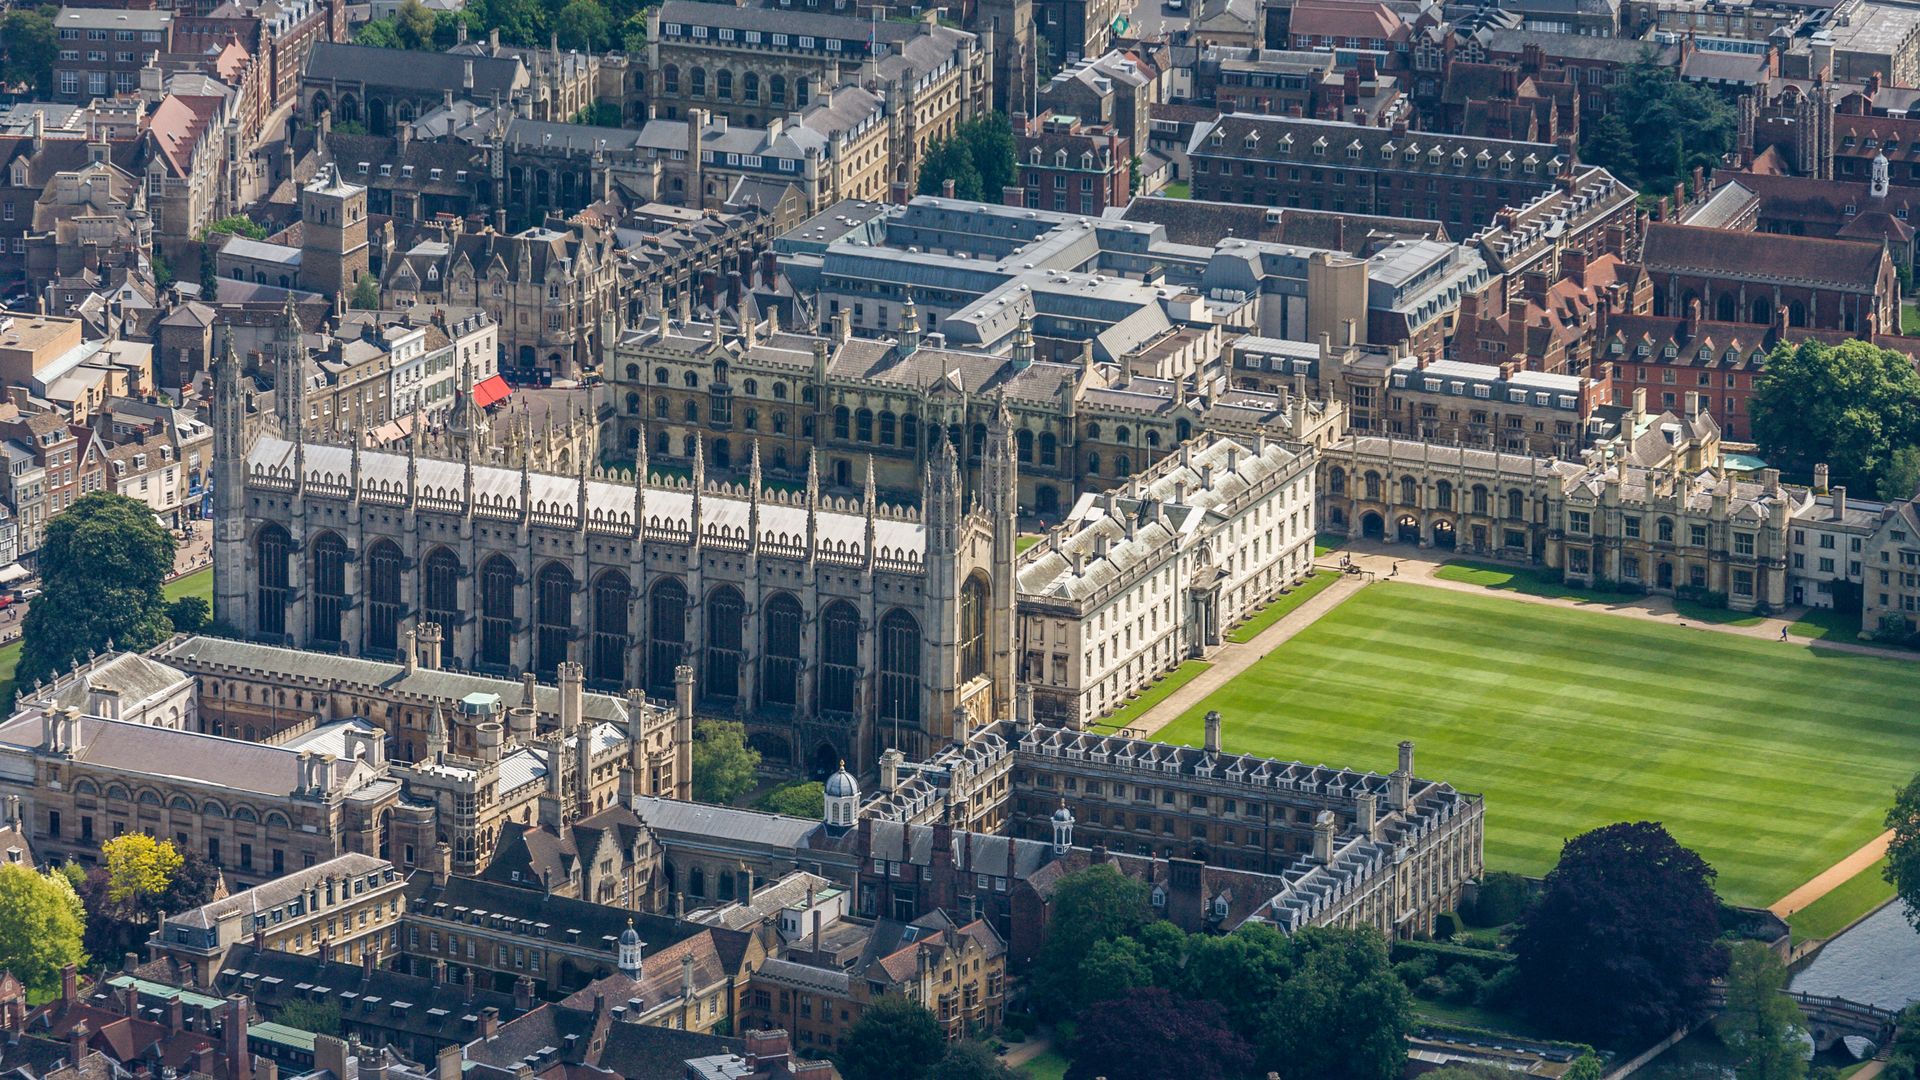 Aerial view of King's College, part of Cambridge University on May 23, 2007